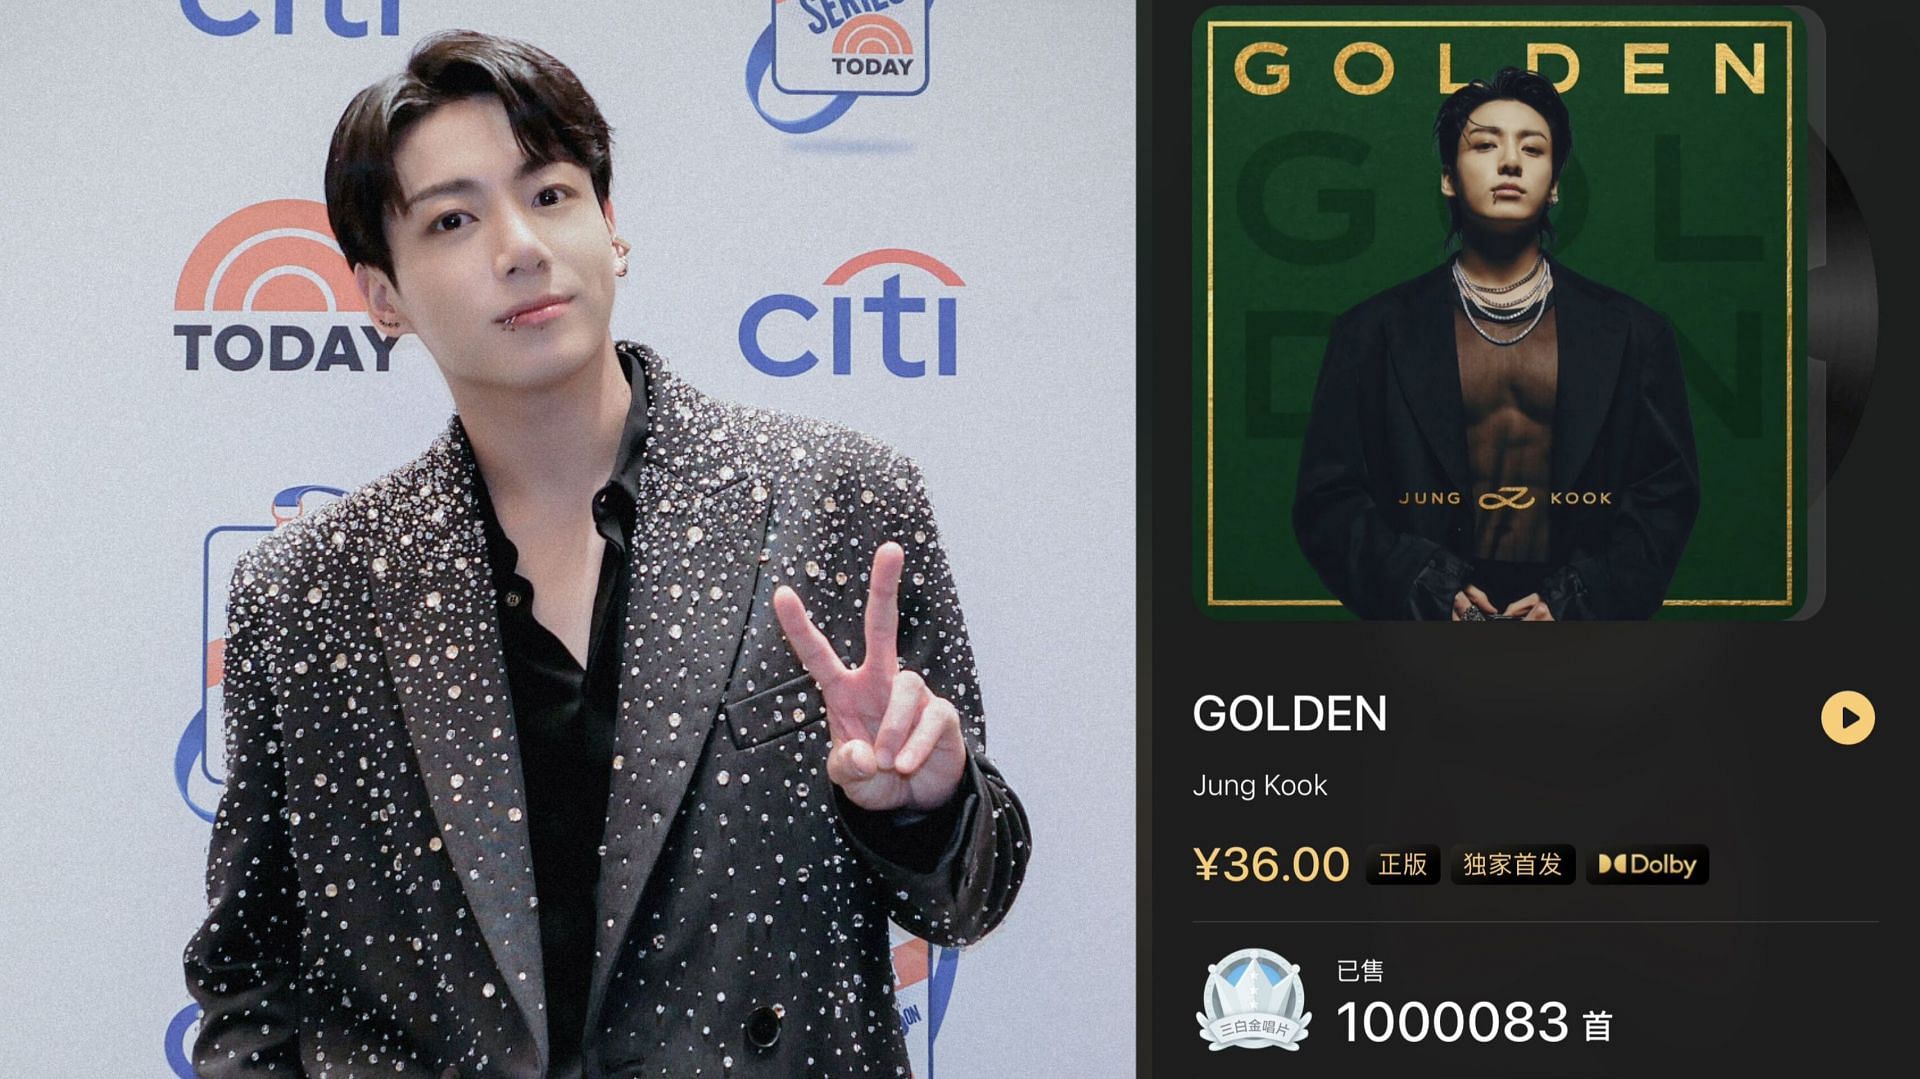 Sold-out king for a reason: Fans rejoice as BTS' Jungkook's“GOLDEN” crowns  as the million-seller album on China's QQ Music